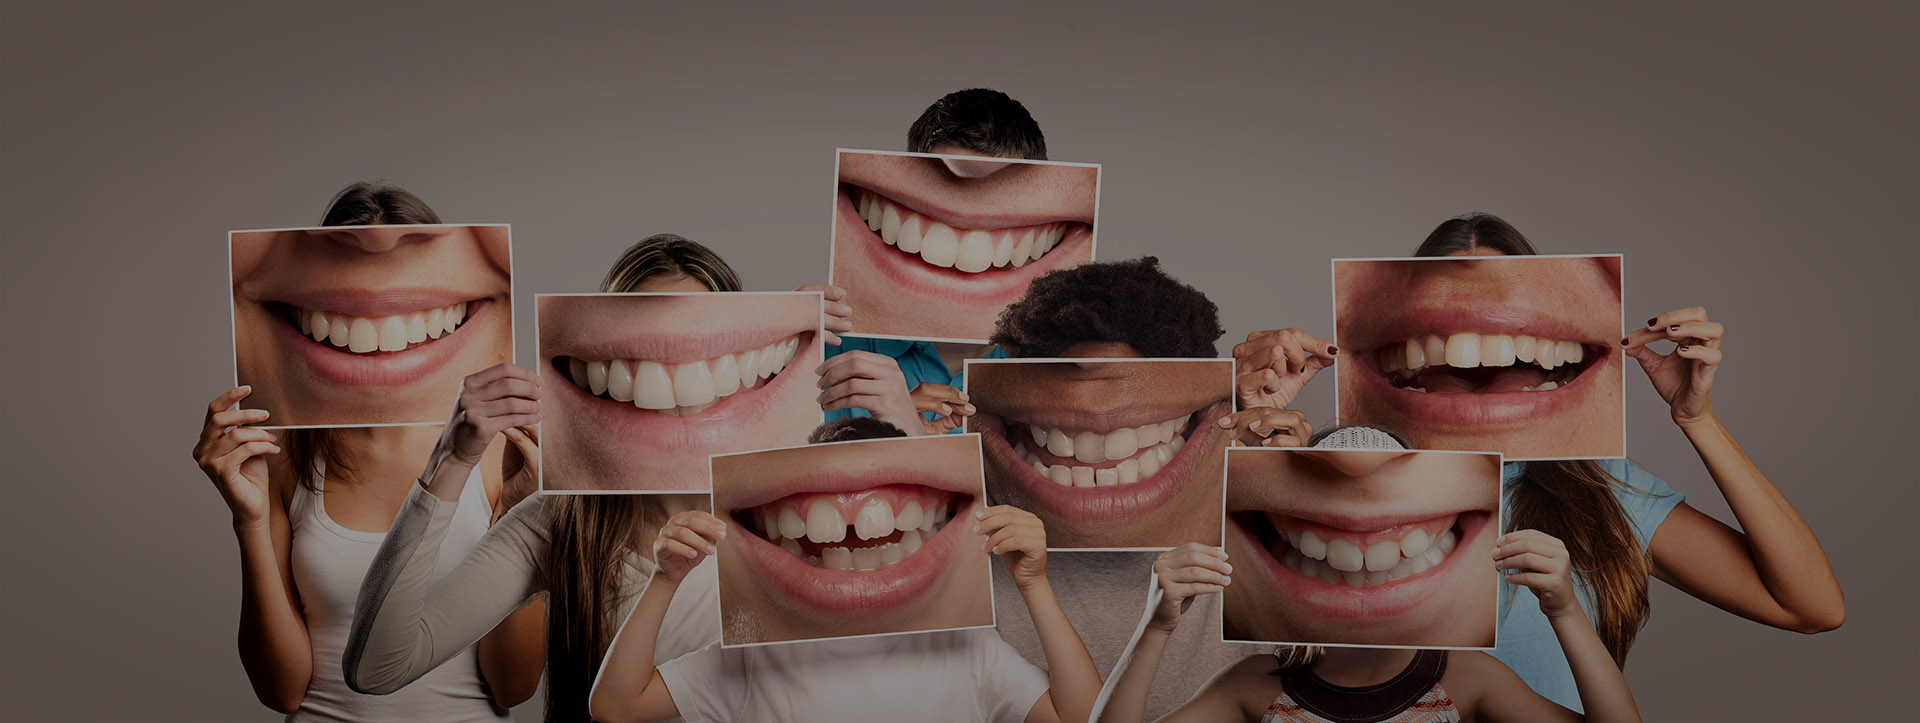 Benefits of Orthodontic Treatment on Overall Health and Well-Being